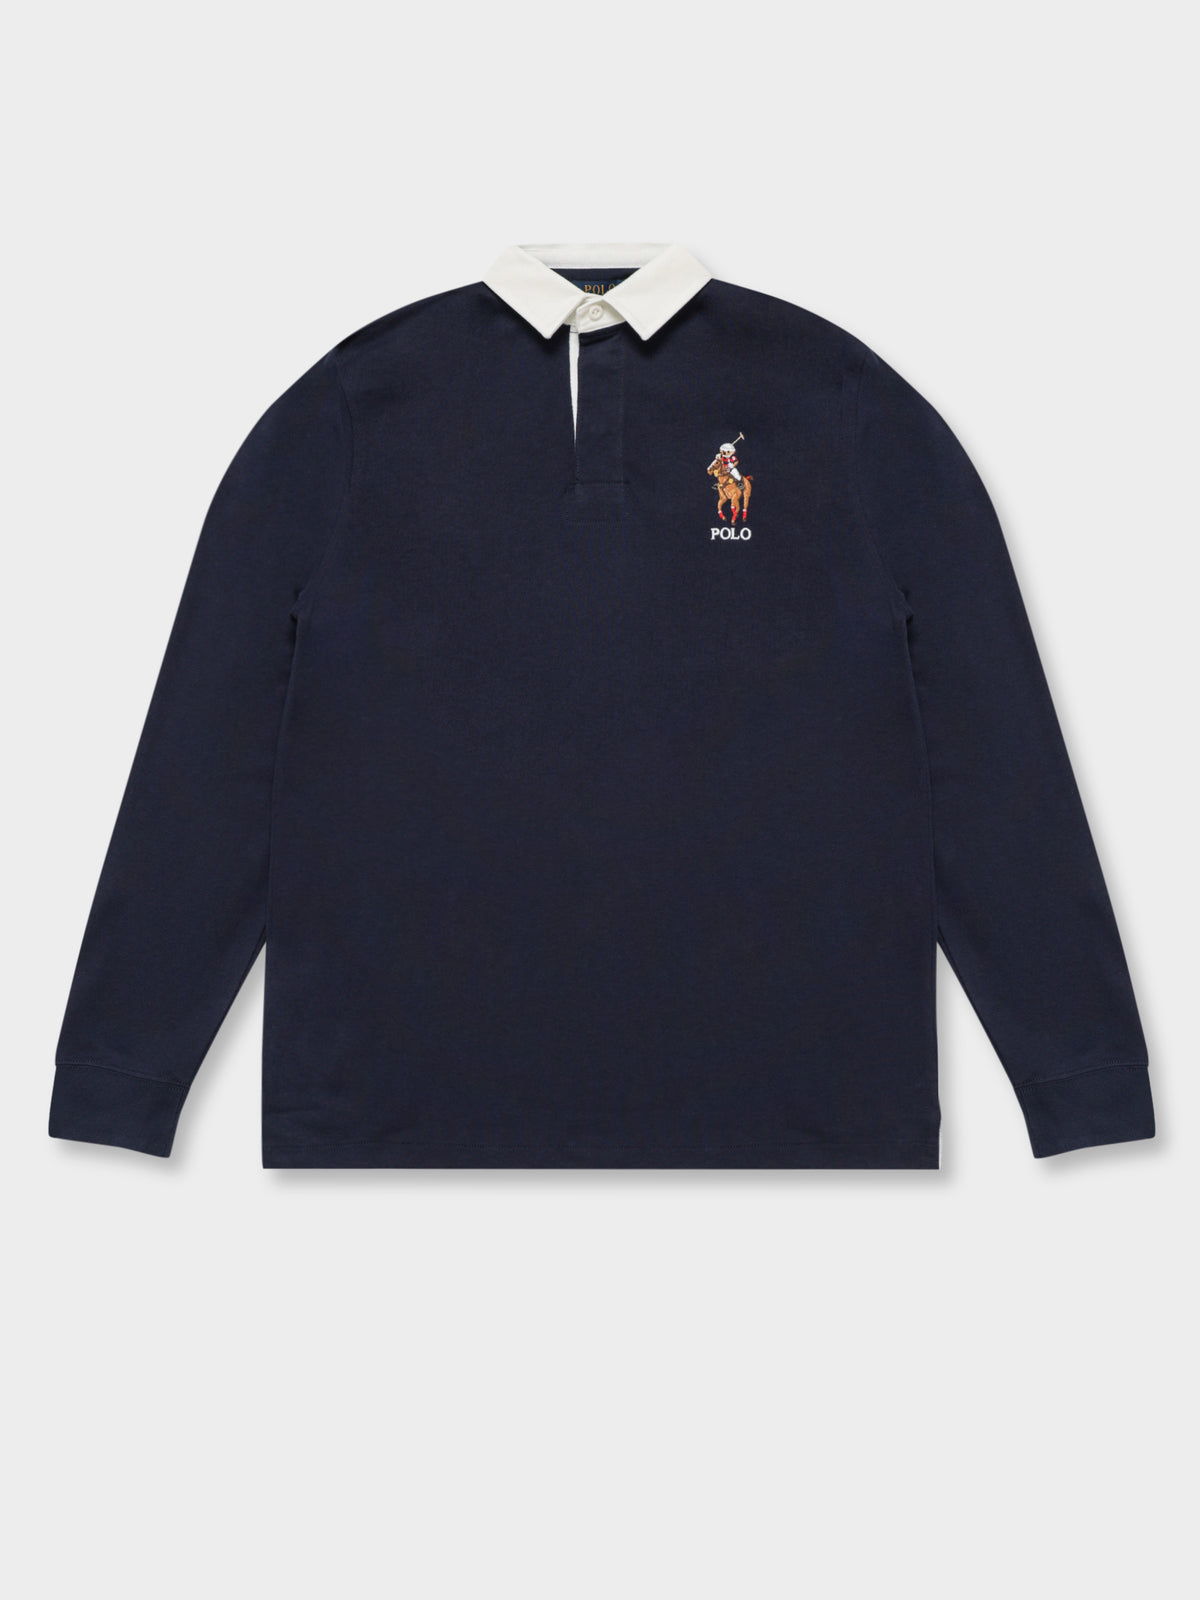 Polo Bear and Big Pony Rugby Shirt in Navy